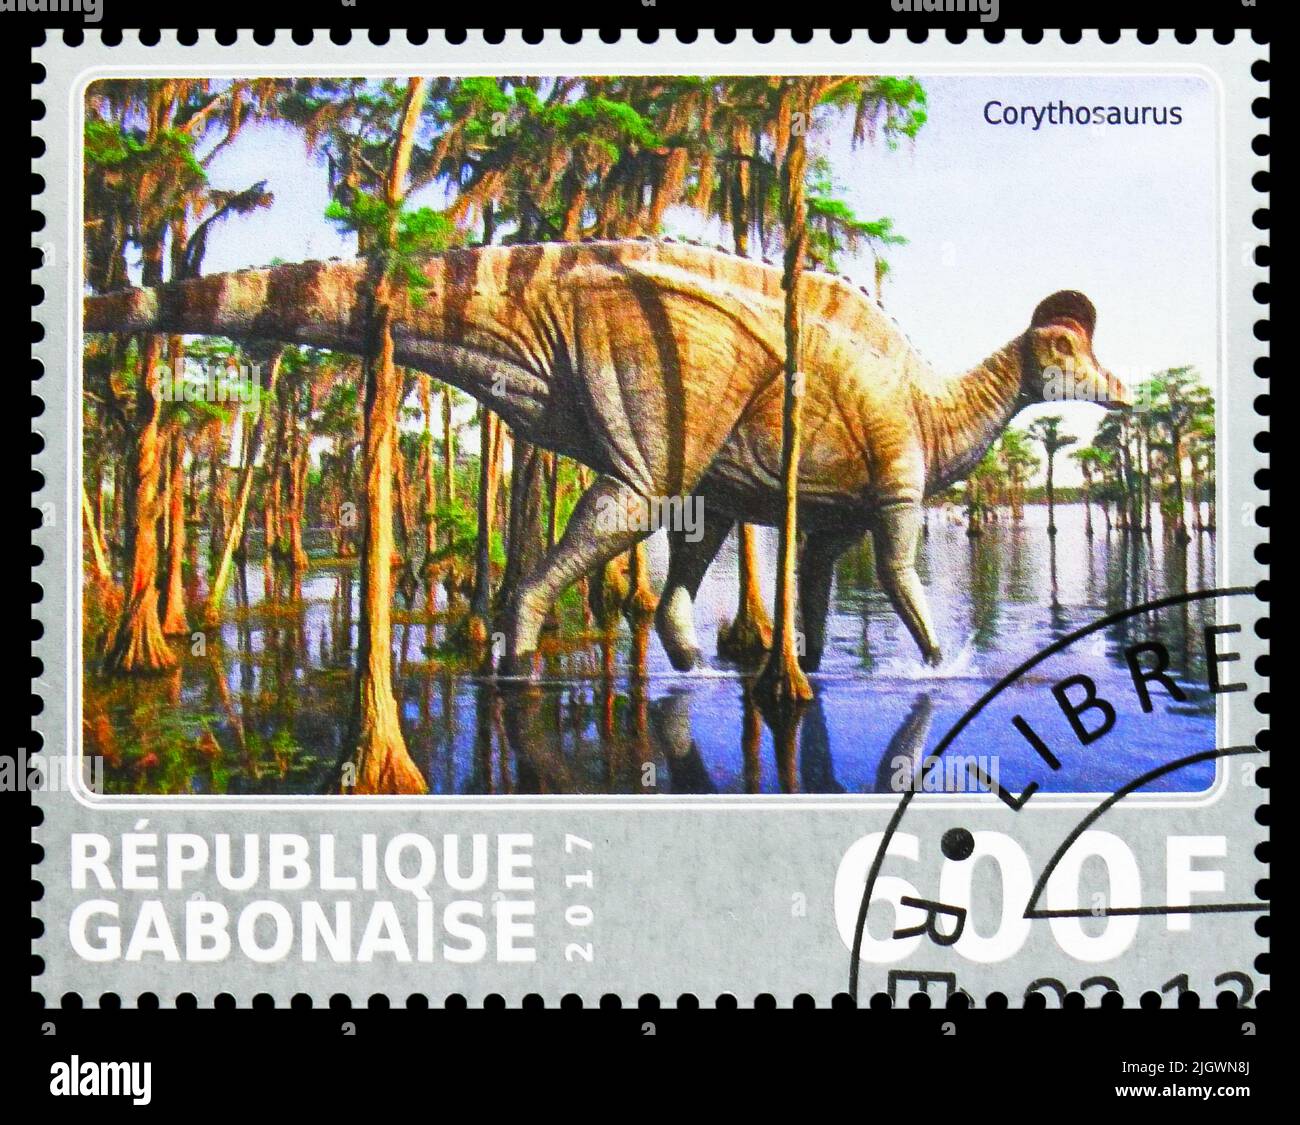 MOSCOW, RUSSIA - JUNE 17, 2022: Postage stamp printed in Gabon shows Corythozaurus, Dinosaurs serie, circa 2017 Stock Photo